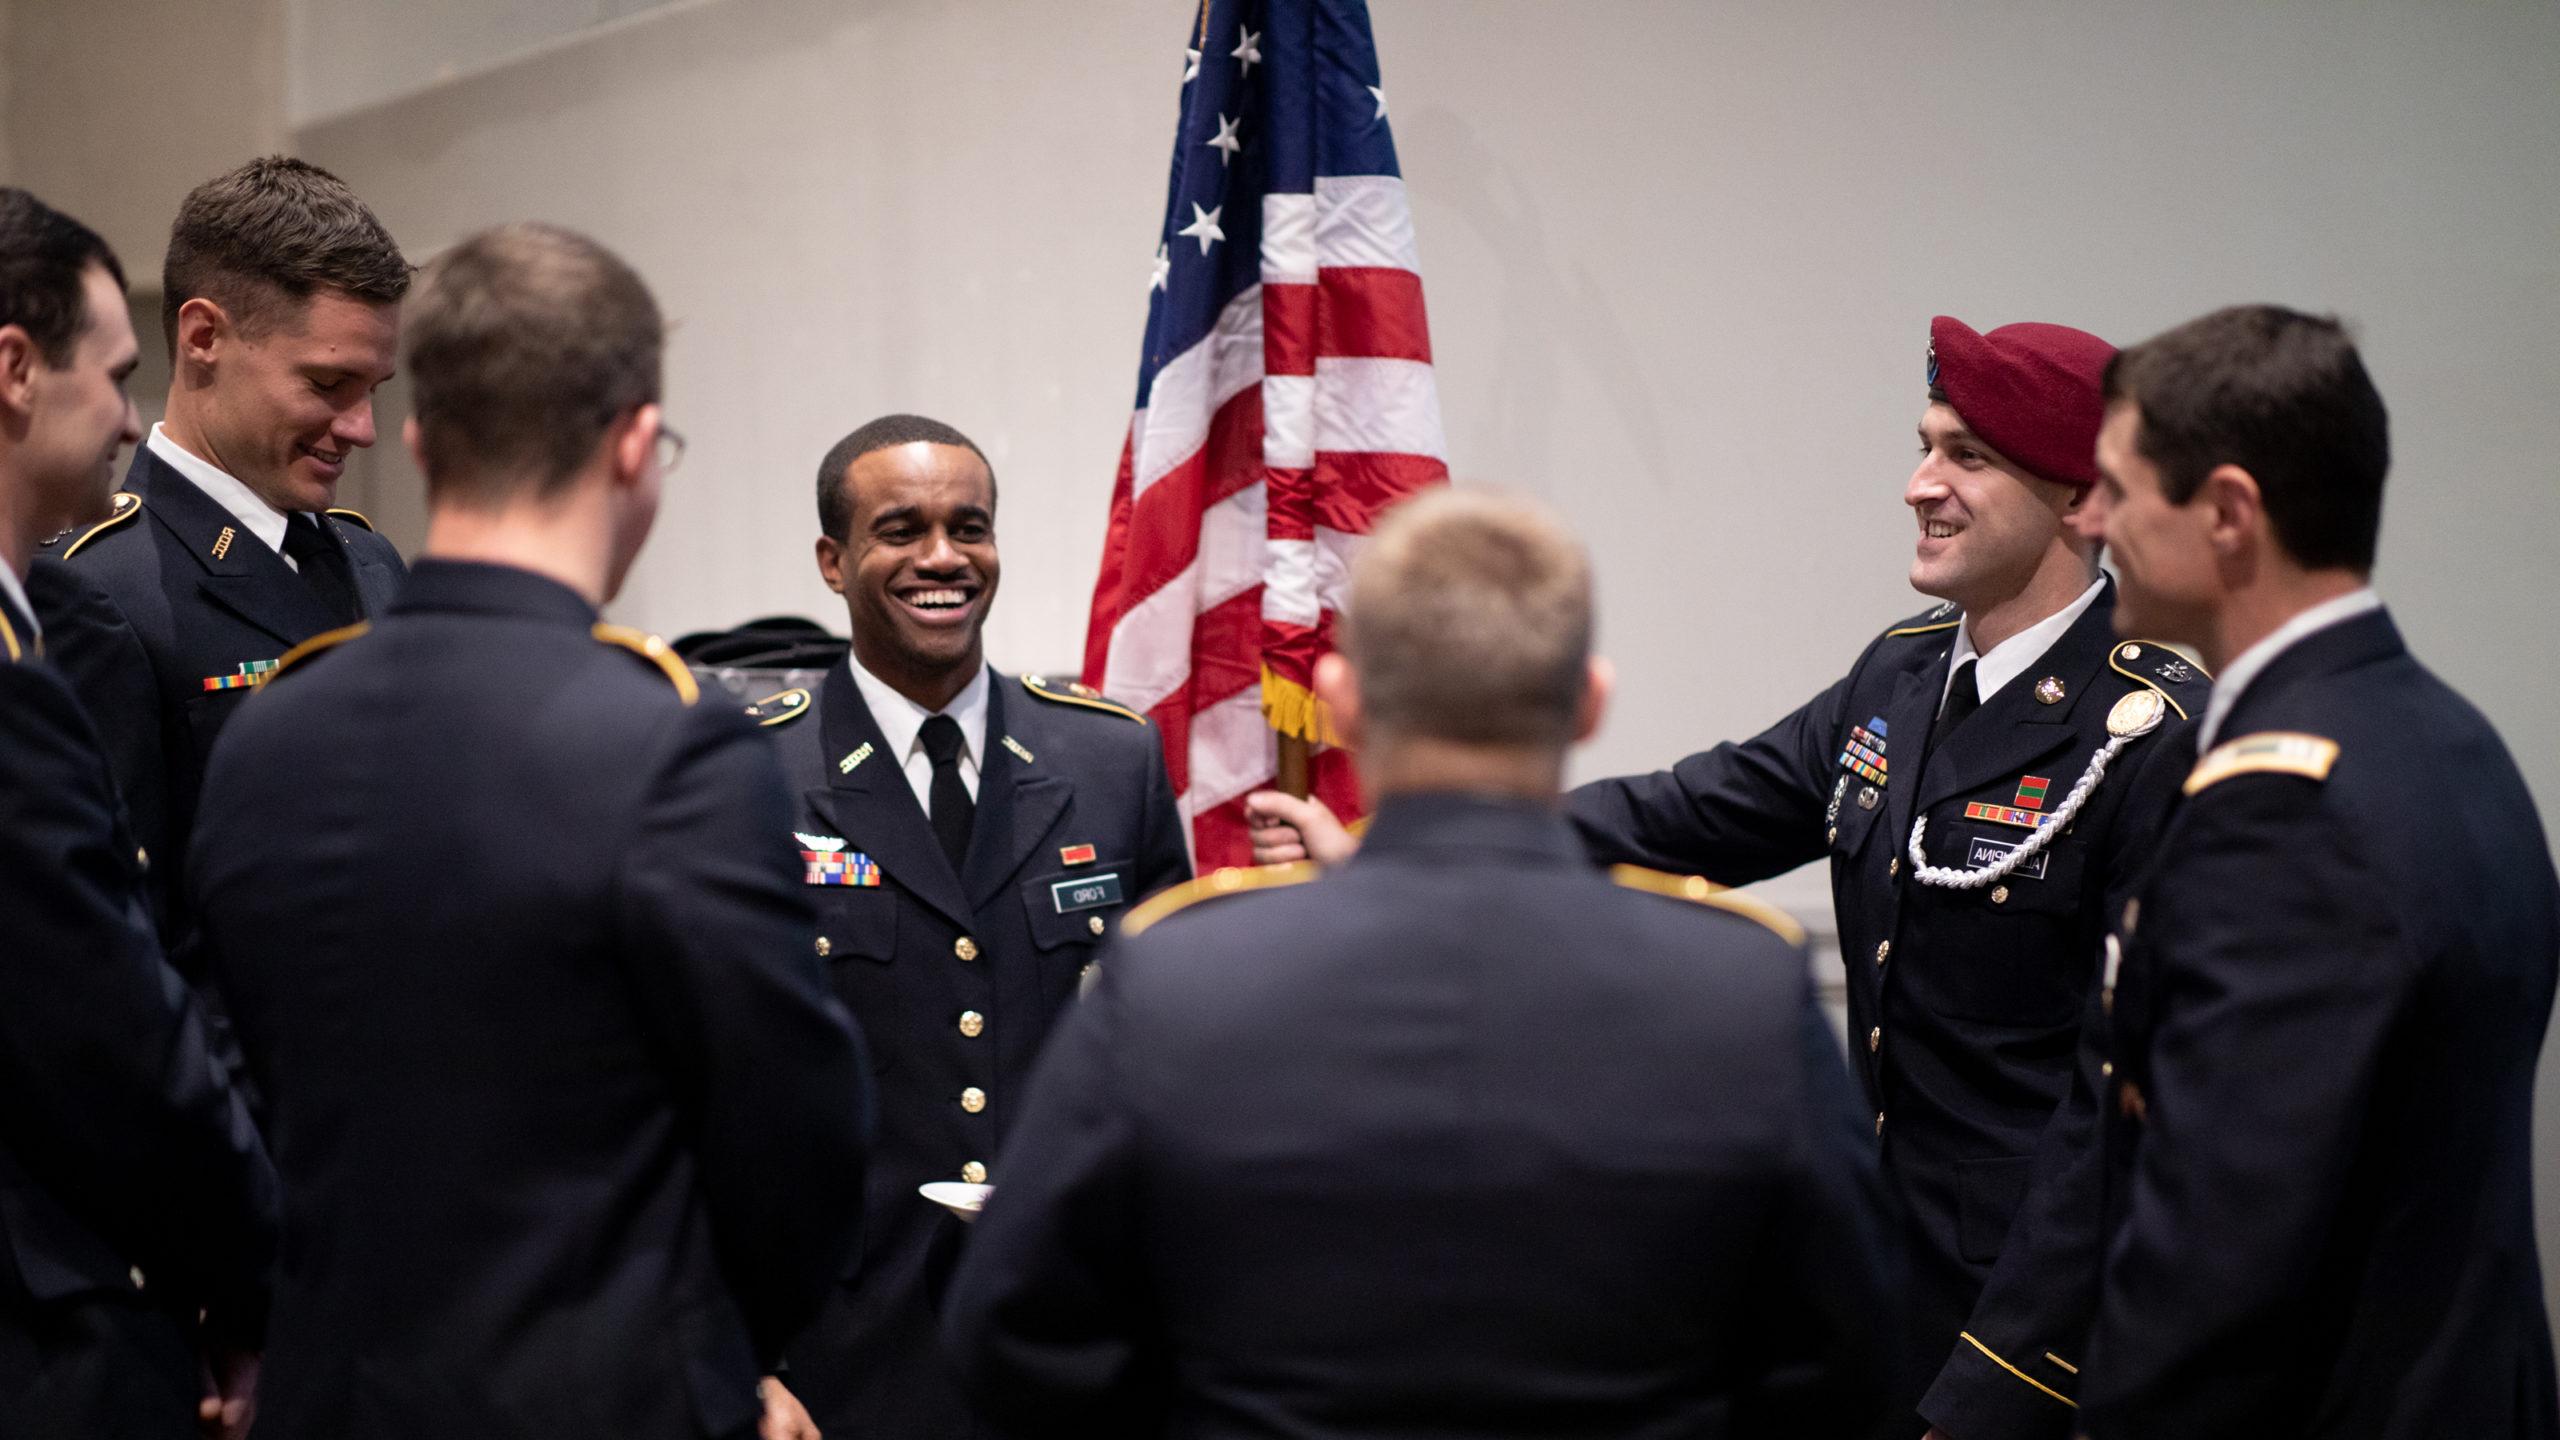 Veteran's Graduation, graduates dressed in military uniforms laughing in front of an American flag